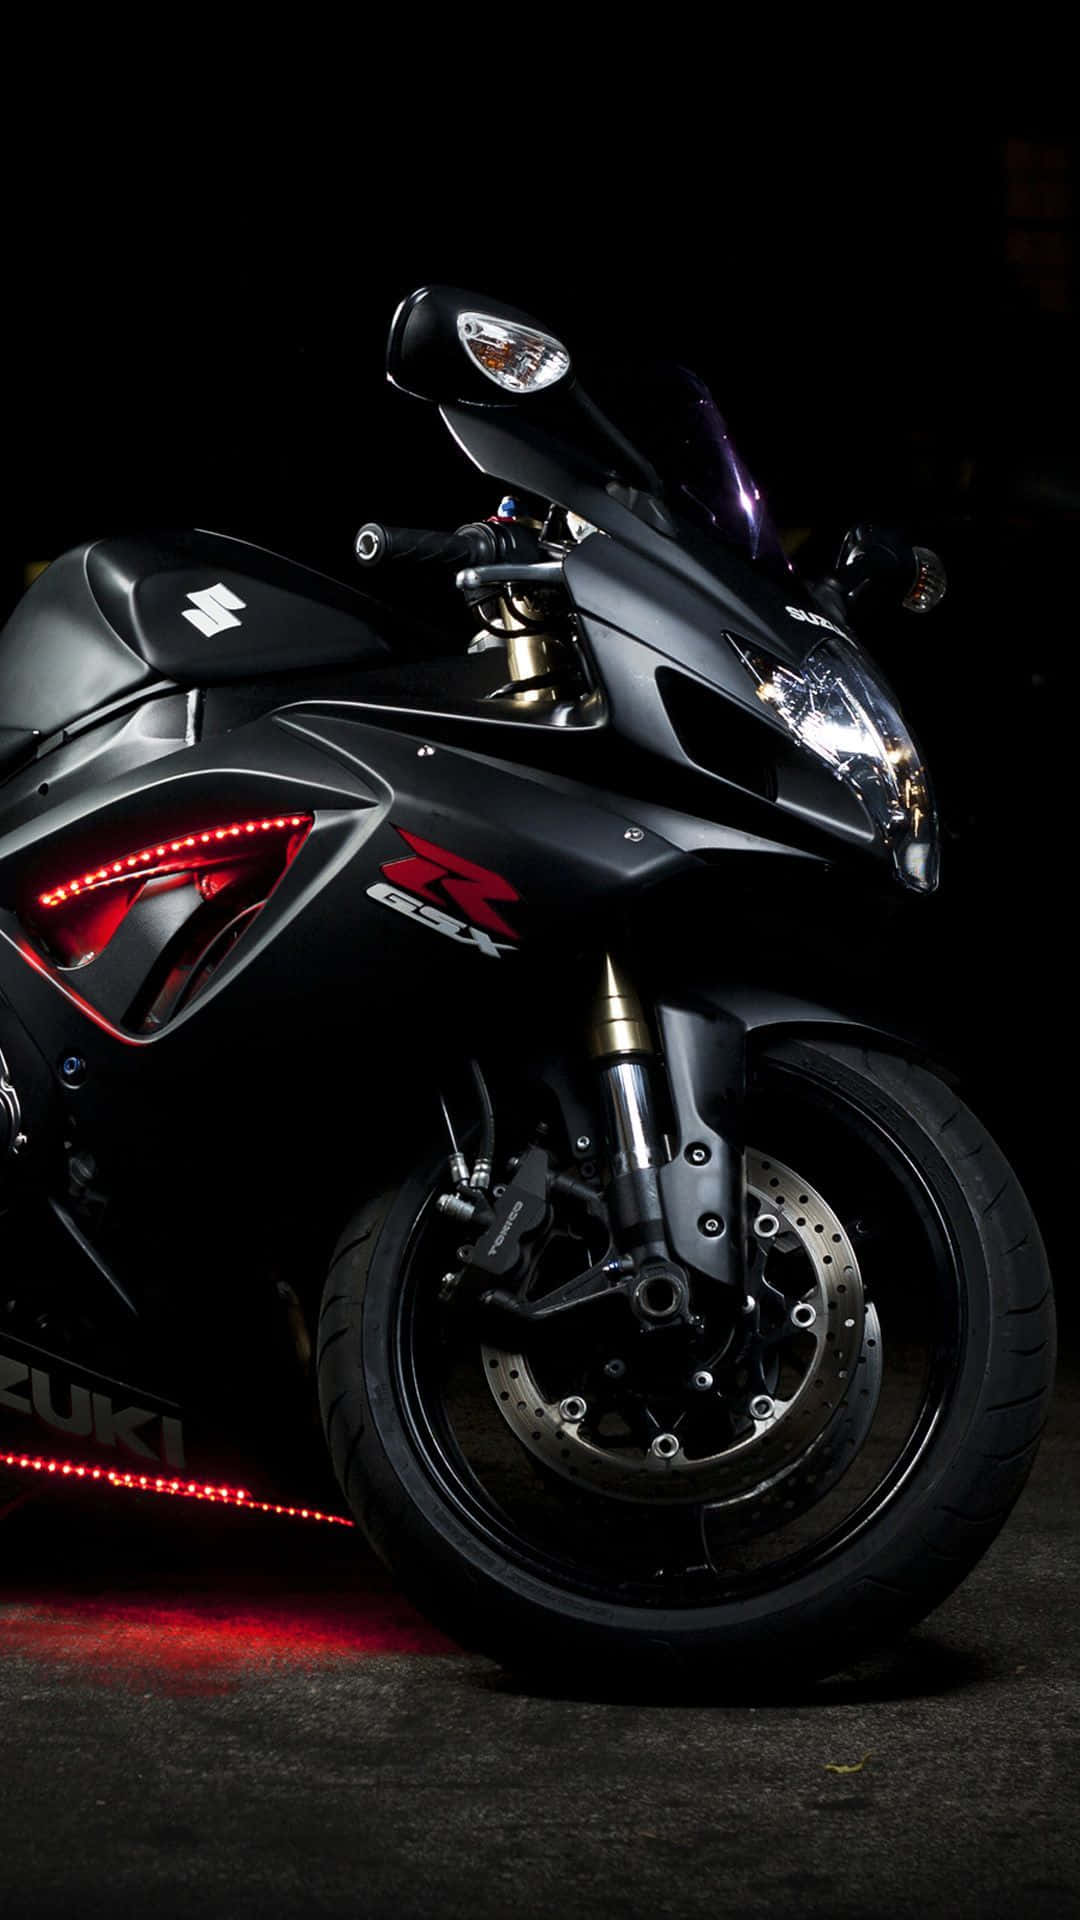 A Black Motorcycle Is Parked In A Dark Area Wallpaper